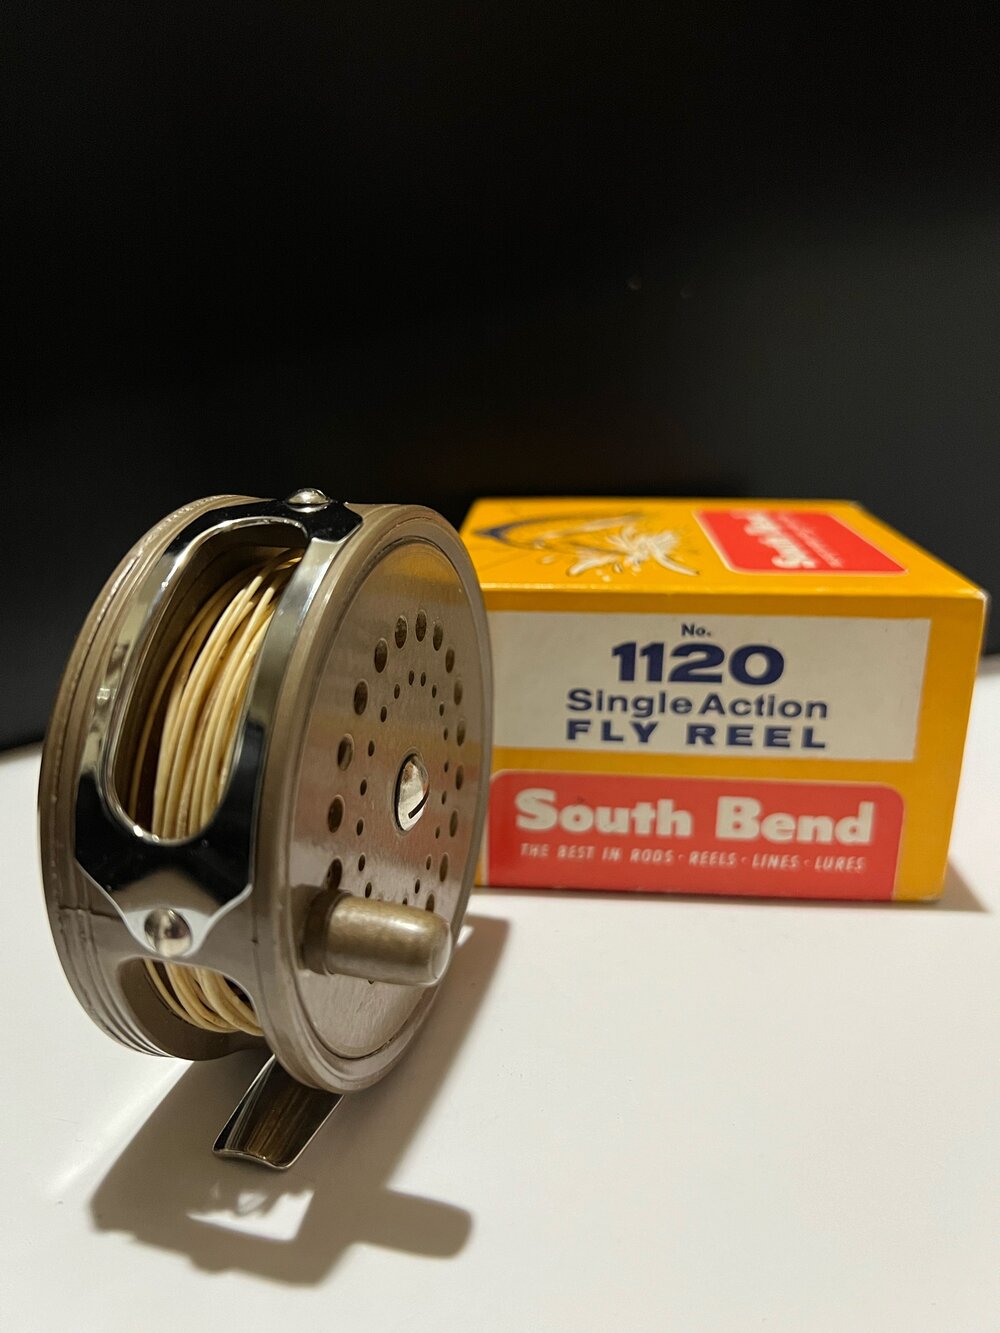 South Bend 1120 Single Action Fly Reel Reversible with Original Box  Circa-1960 — VINTAGE FISHING REELS